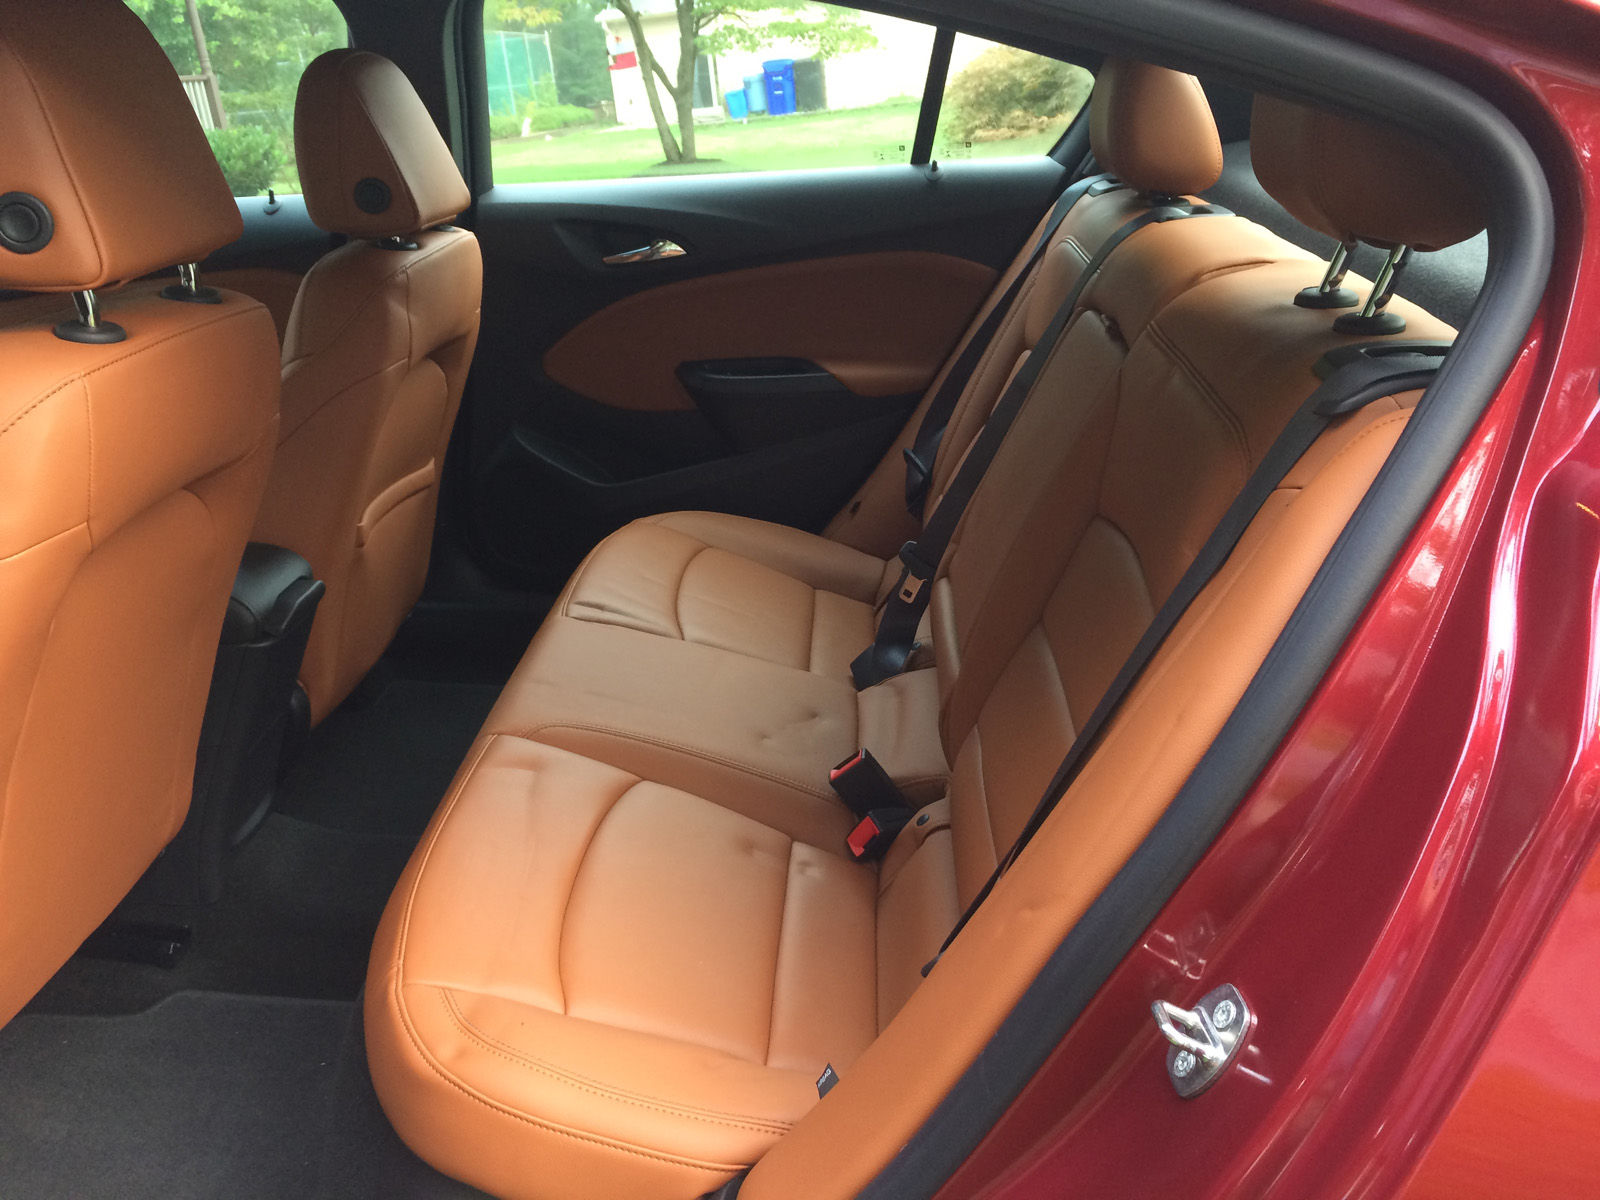 The seats on the loaded diesel model are handsome leather with rich-looking stitching that also carries over on the dash; looking upscale for compact. (WTOP/Mike Parris)